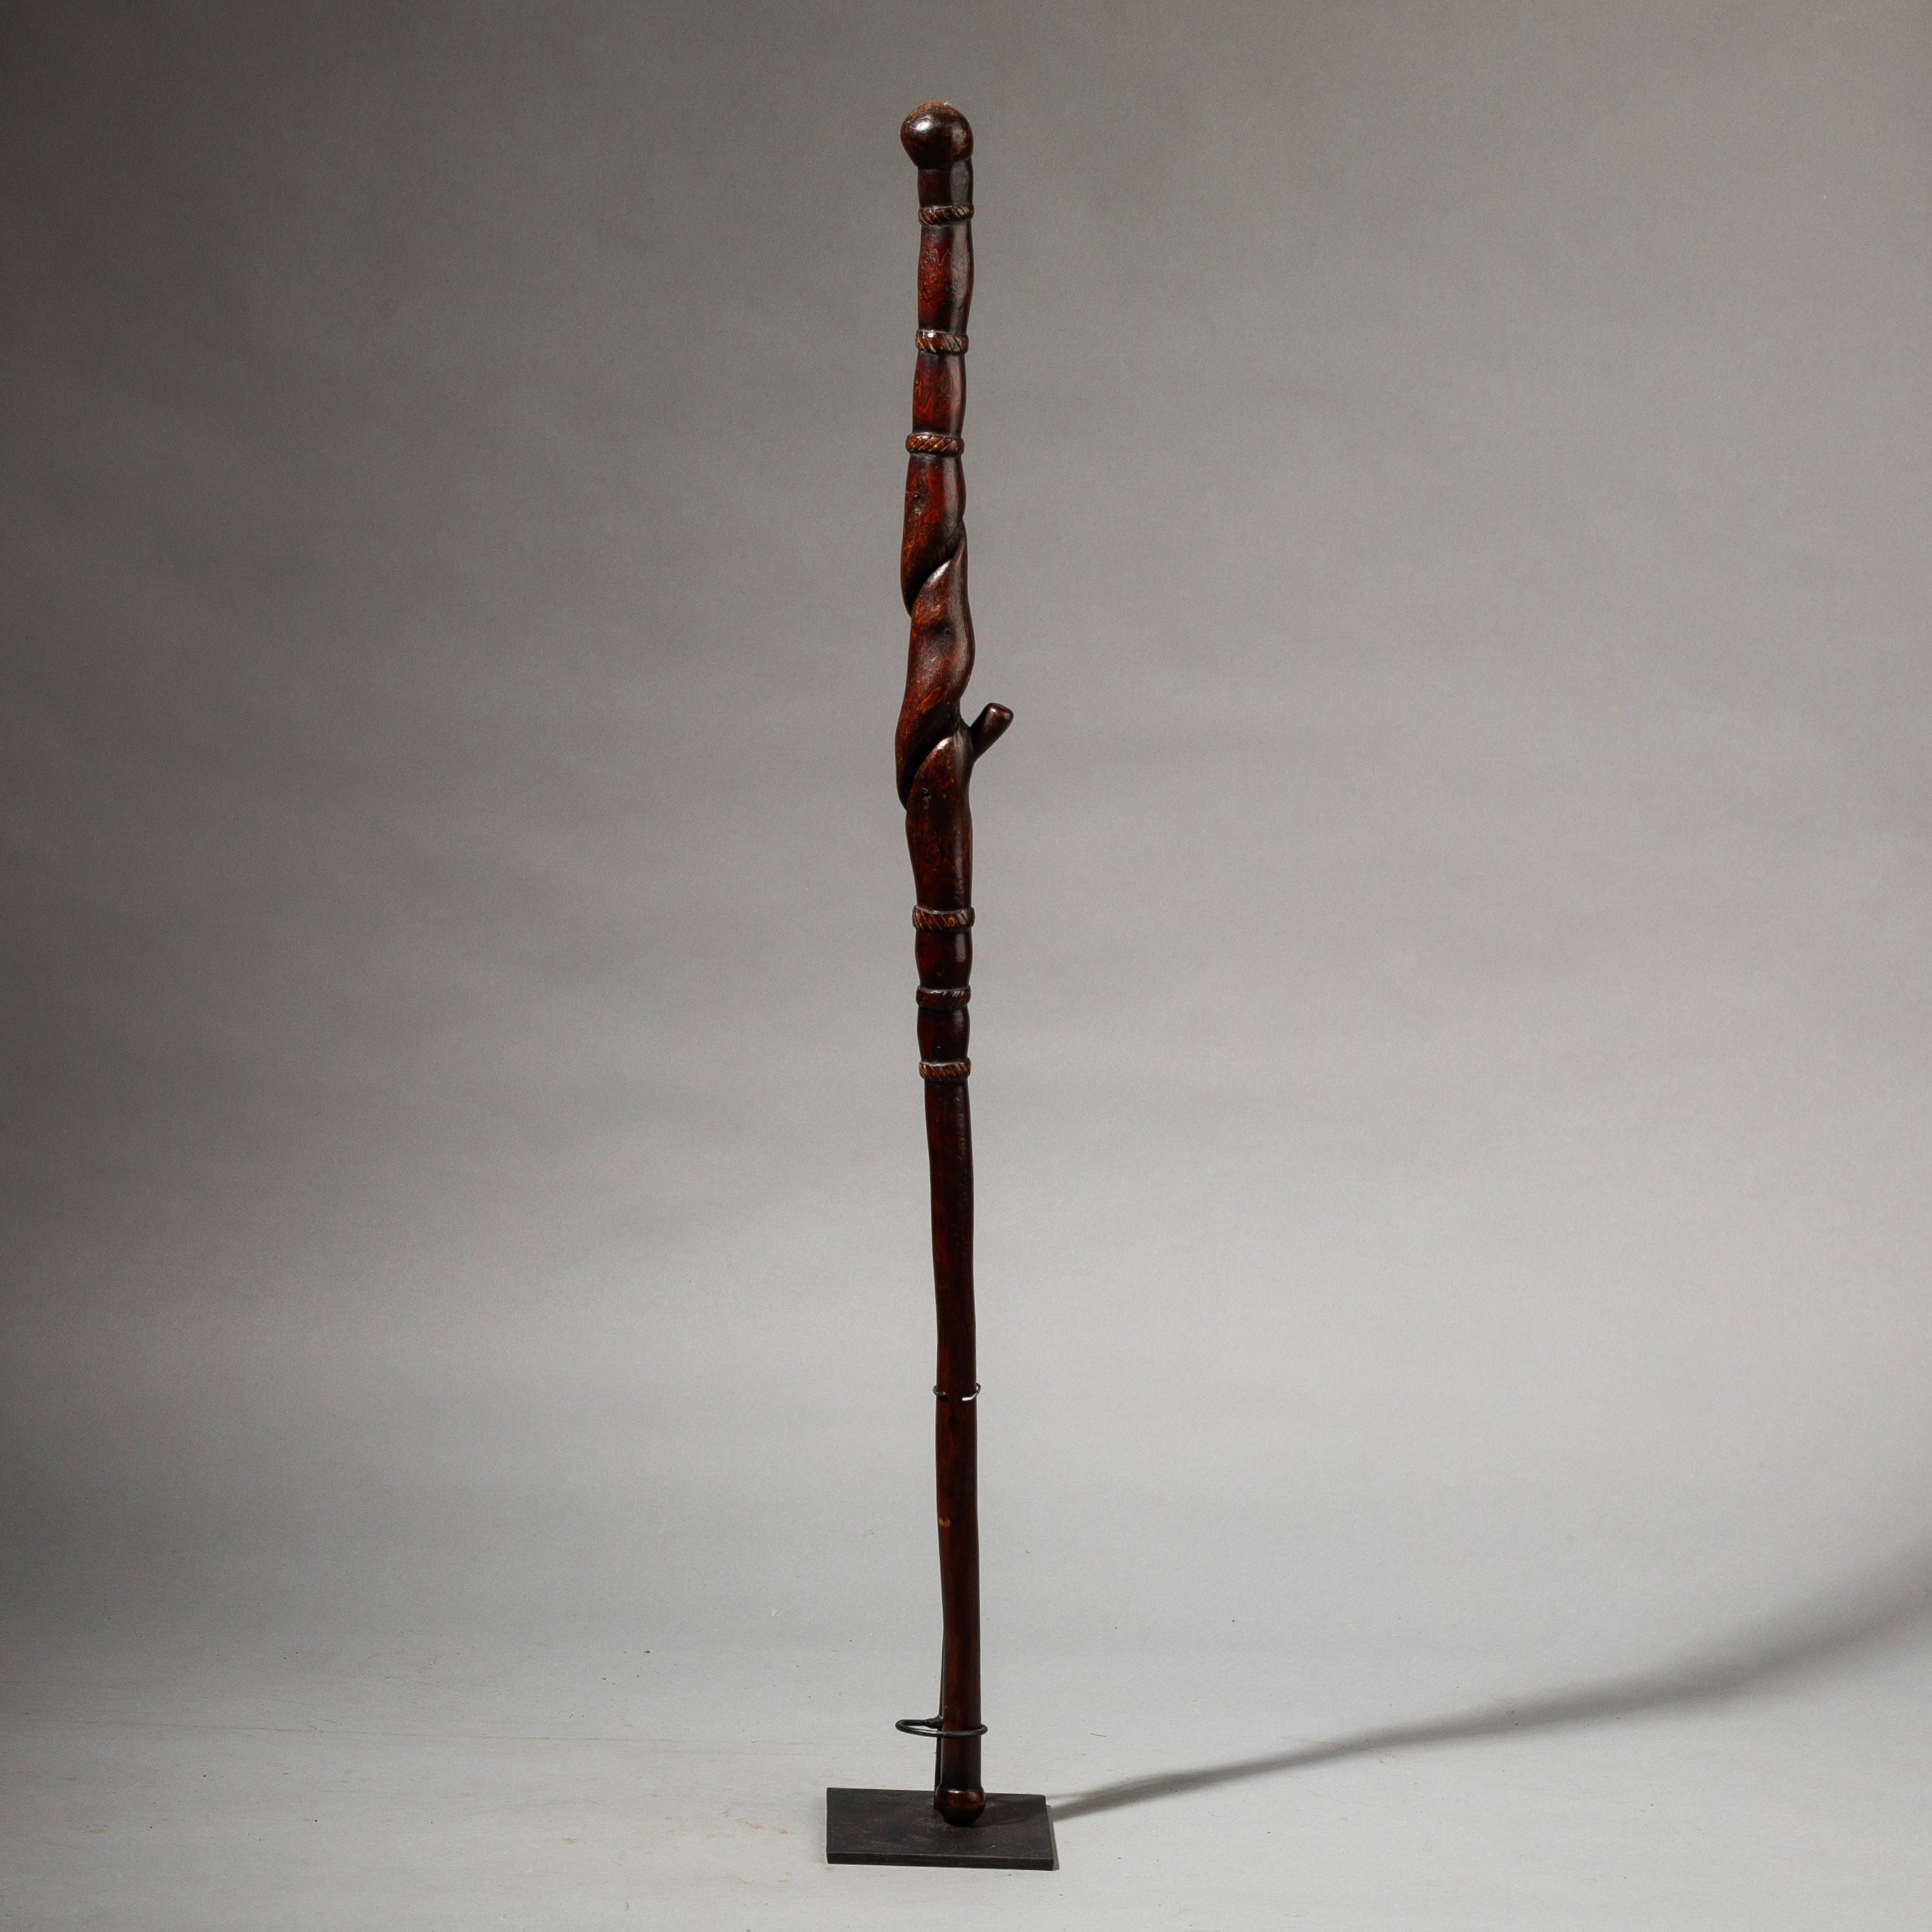 A BEAUTIFULLY SCULPTURAL WALKING STICK FROM TANZANIA EAST AFRICA ( No 746)